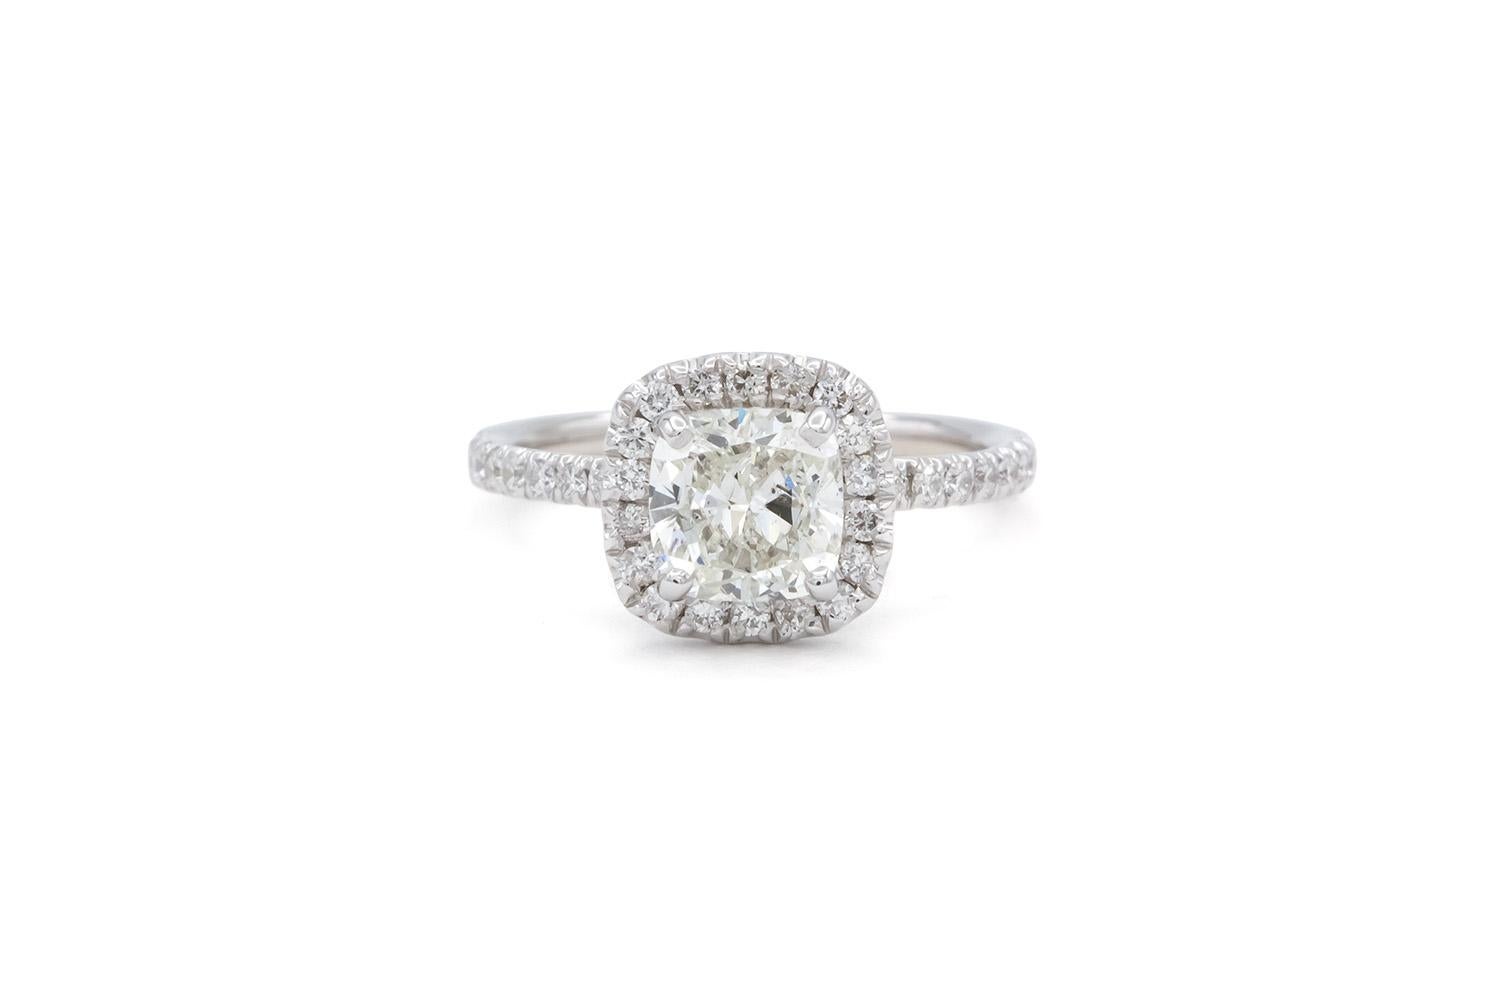 We are very pleased to present this remarkable EGL Certified & Laser Inscribed 14k White Gold & Cushion Cut Diamond Halo Engagement Ring. This stunning ring features a EGL Certified & Laser Inscribed 1.40ct G/SI2 Cushion Cut Diamond set in a 14k